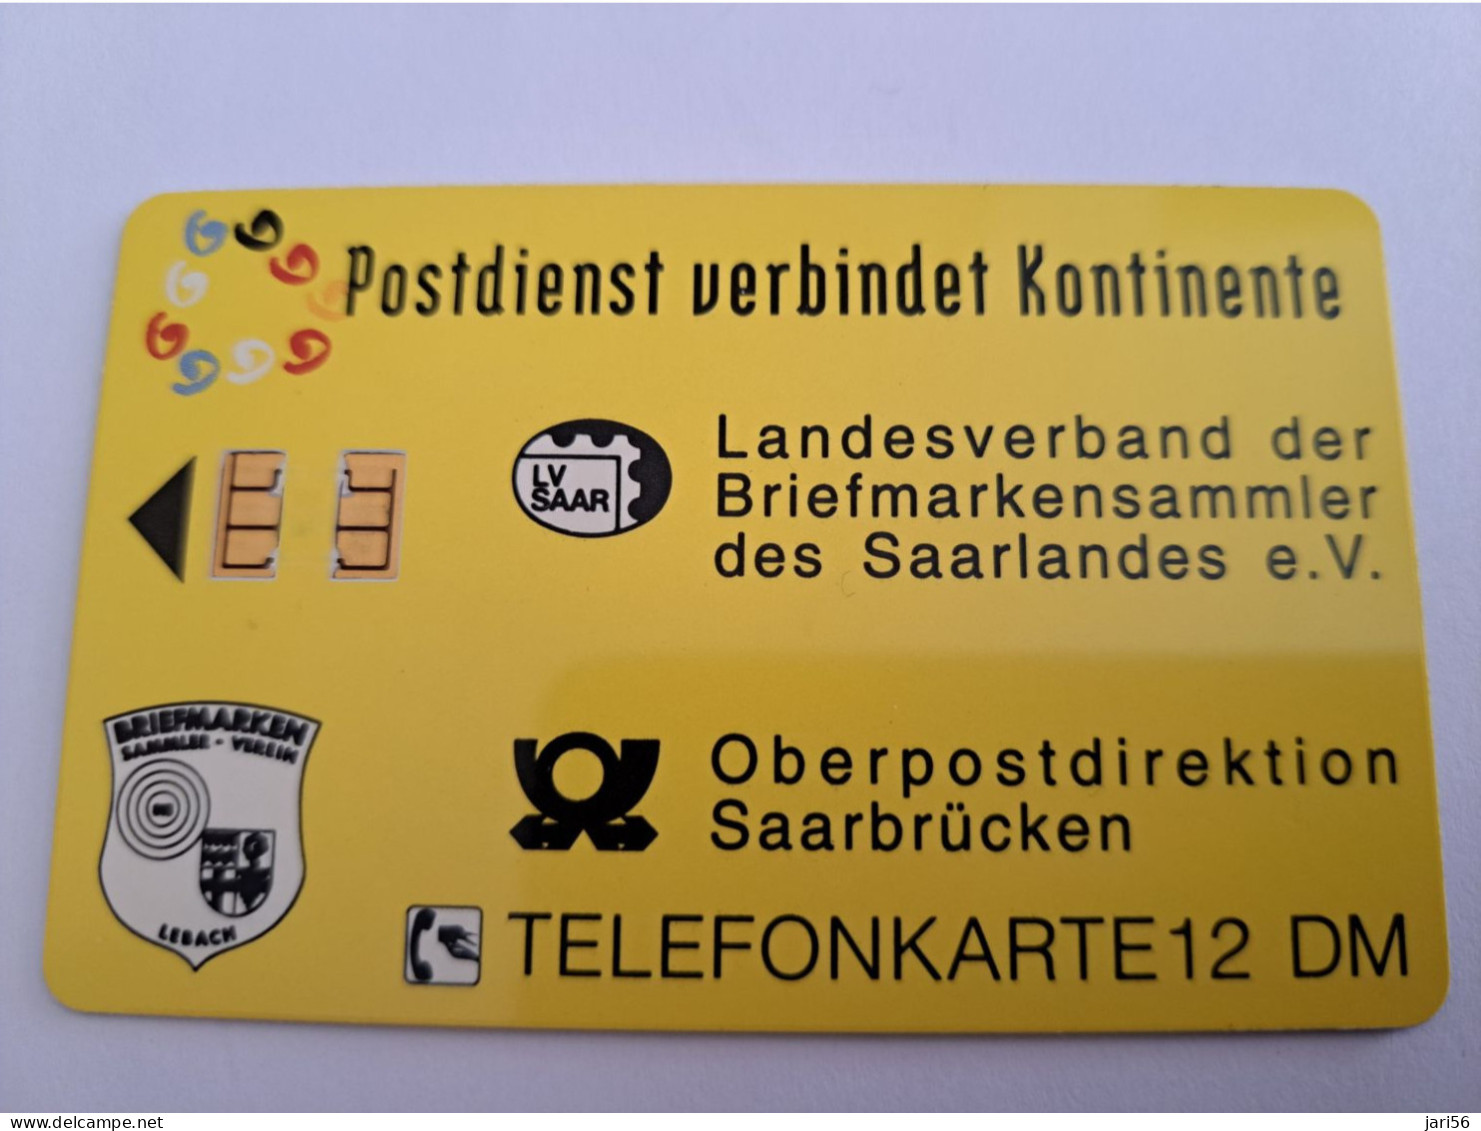 DUITSLAND/ GERMANY  CHIPCARD / STAMPS ON CARD/ TRINATIONALE /   K 097/  15000 EX  / MINT CARD     **16654** - K-Series : Customers Sets